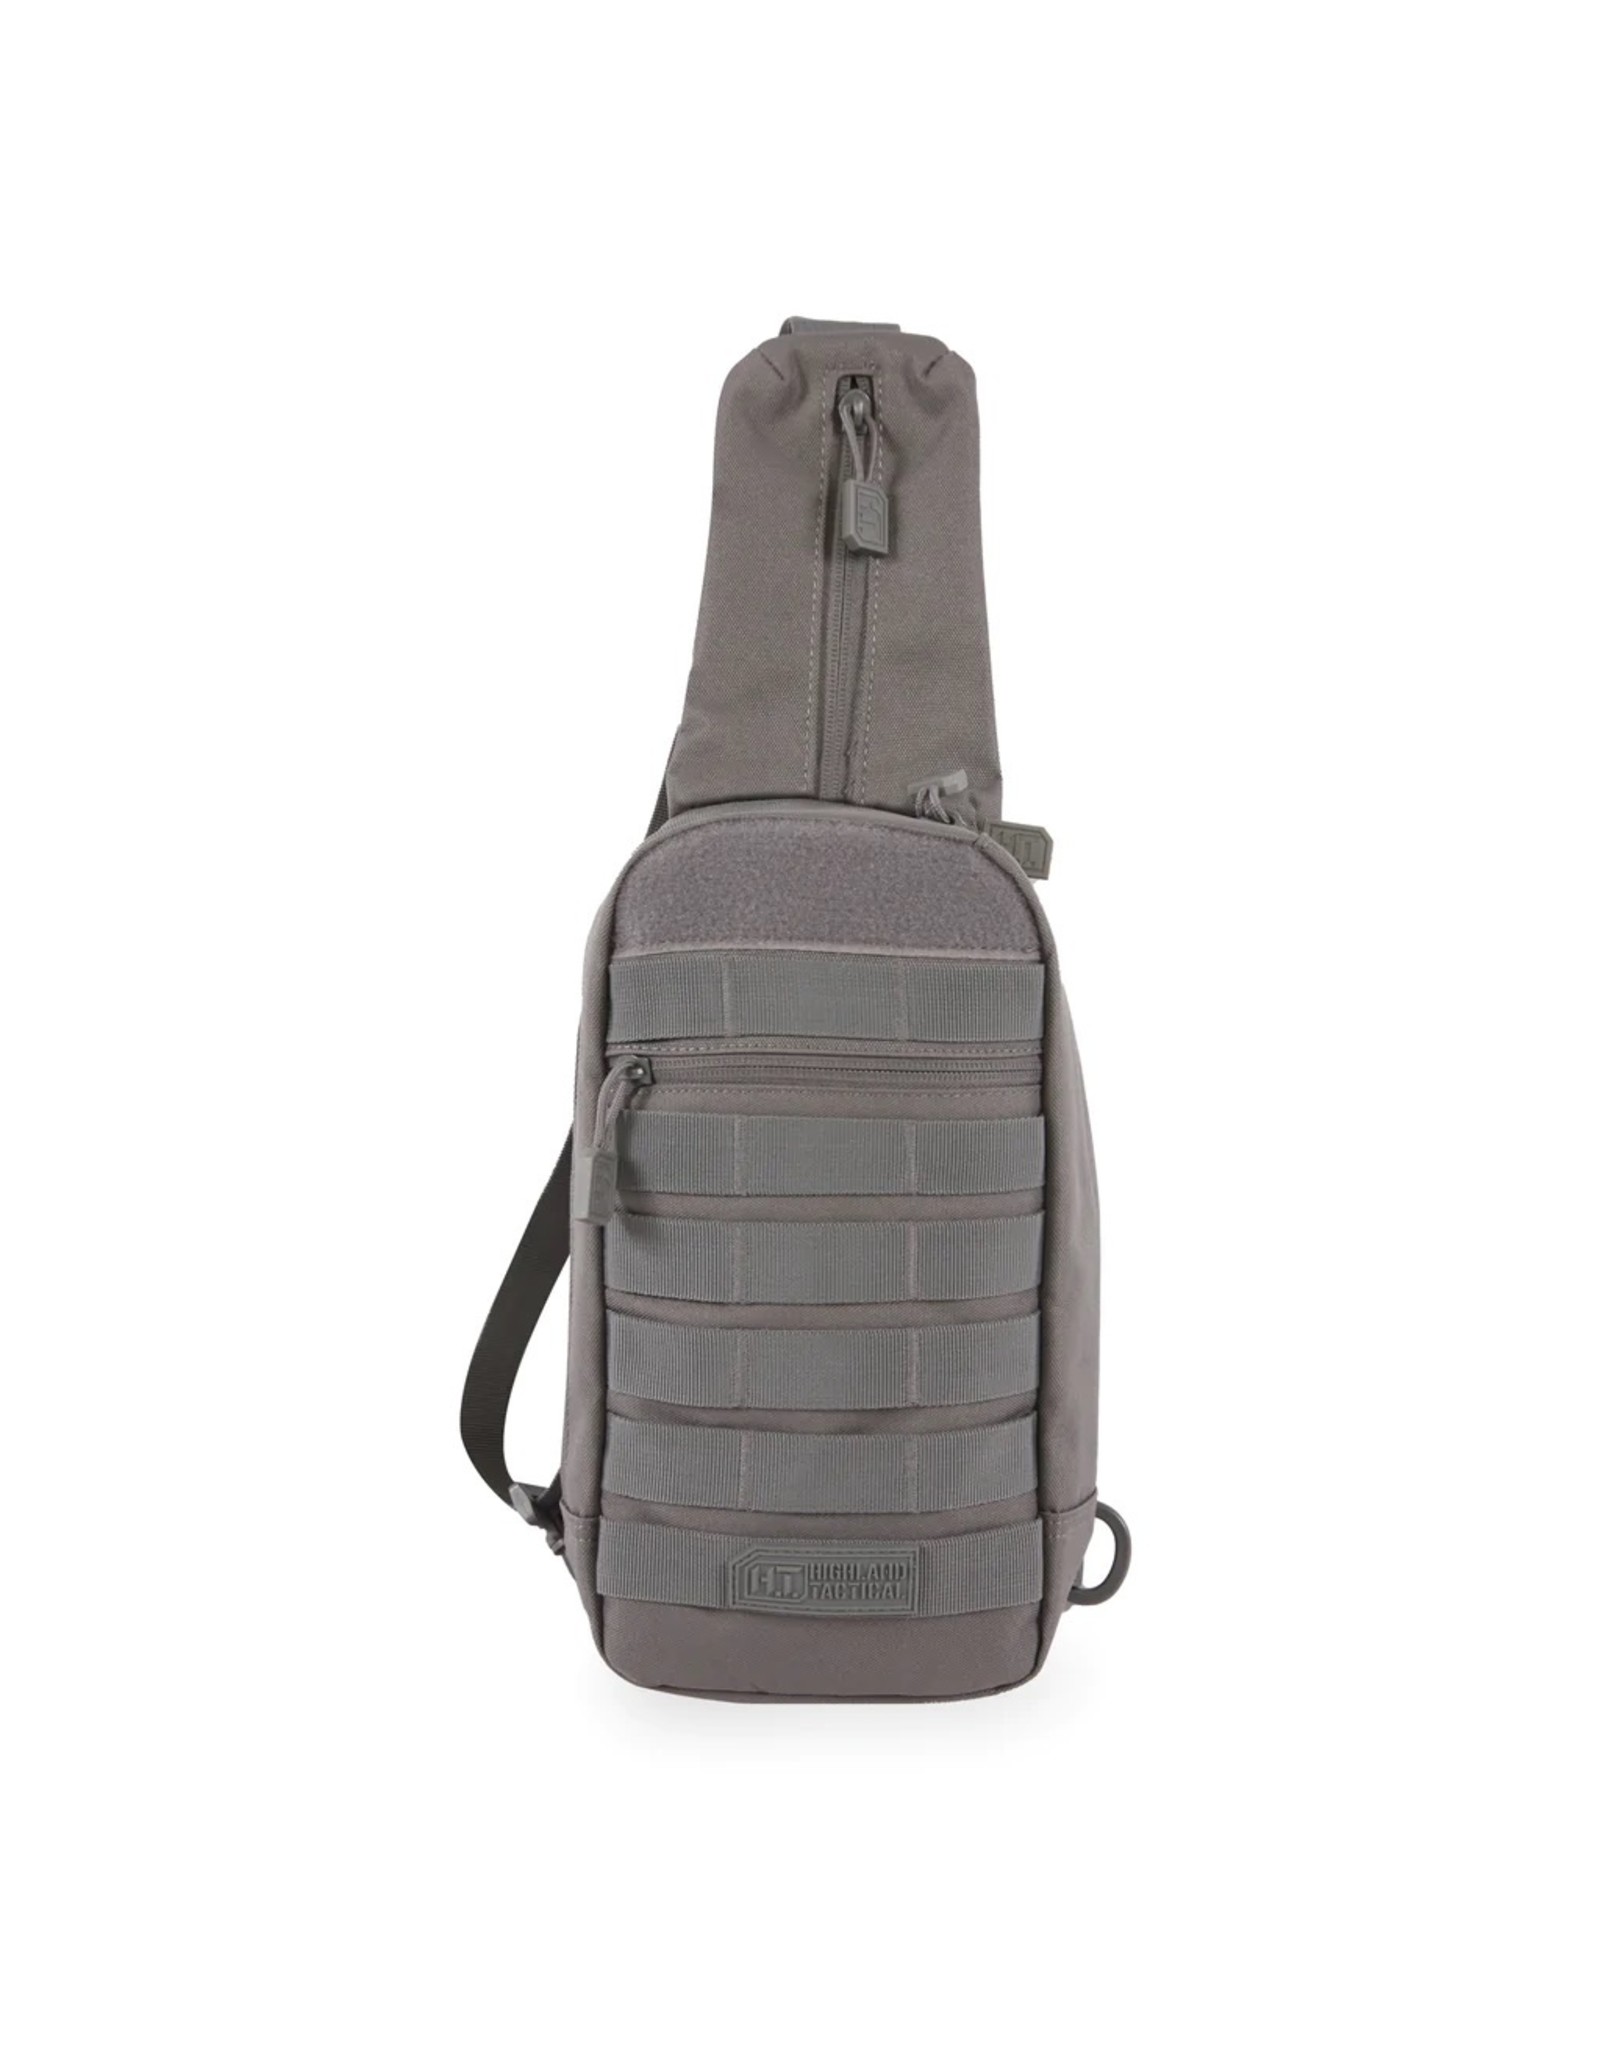 HIGHLAND TACTICAL EXPO SLING BAG